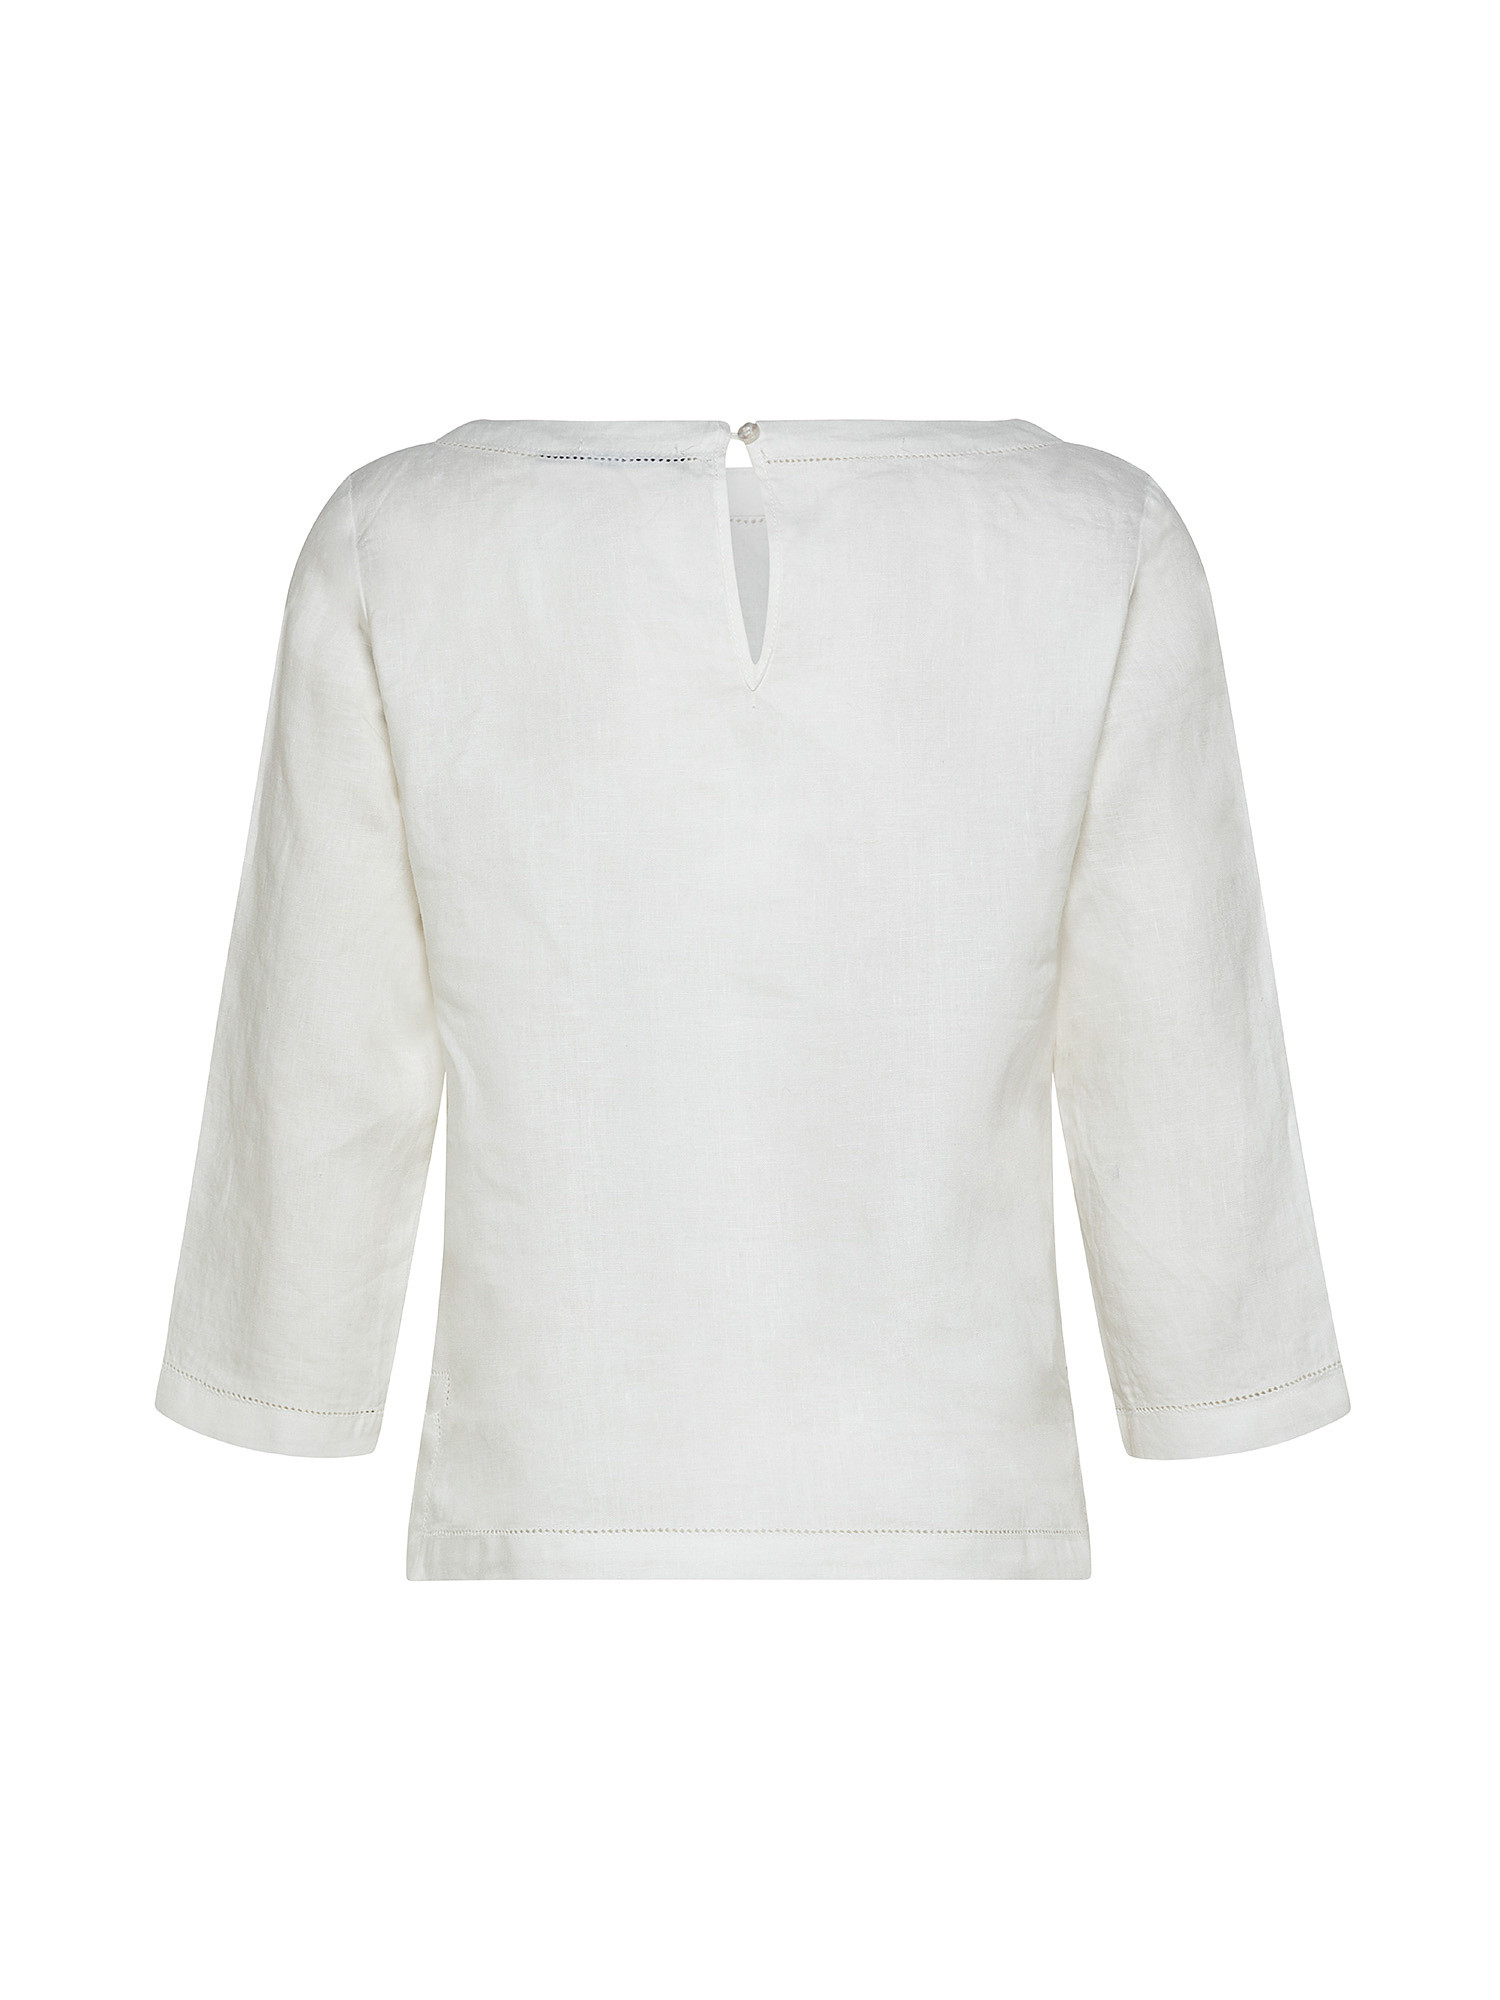 Pure linen blouse with ajour embroidery, White, large image number 1